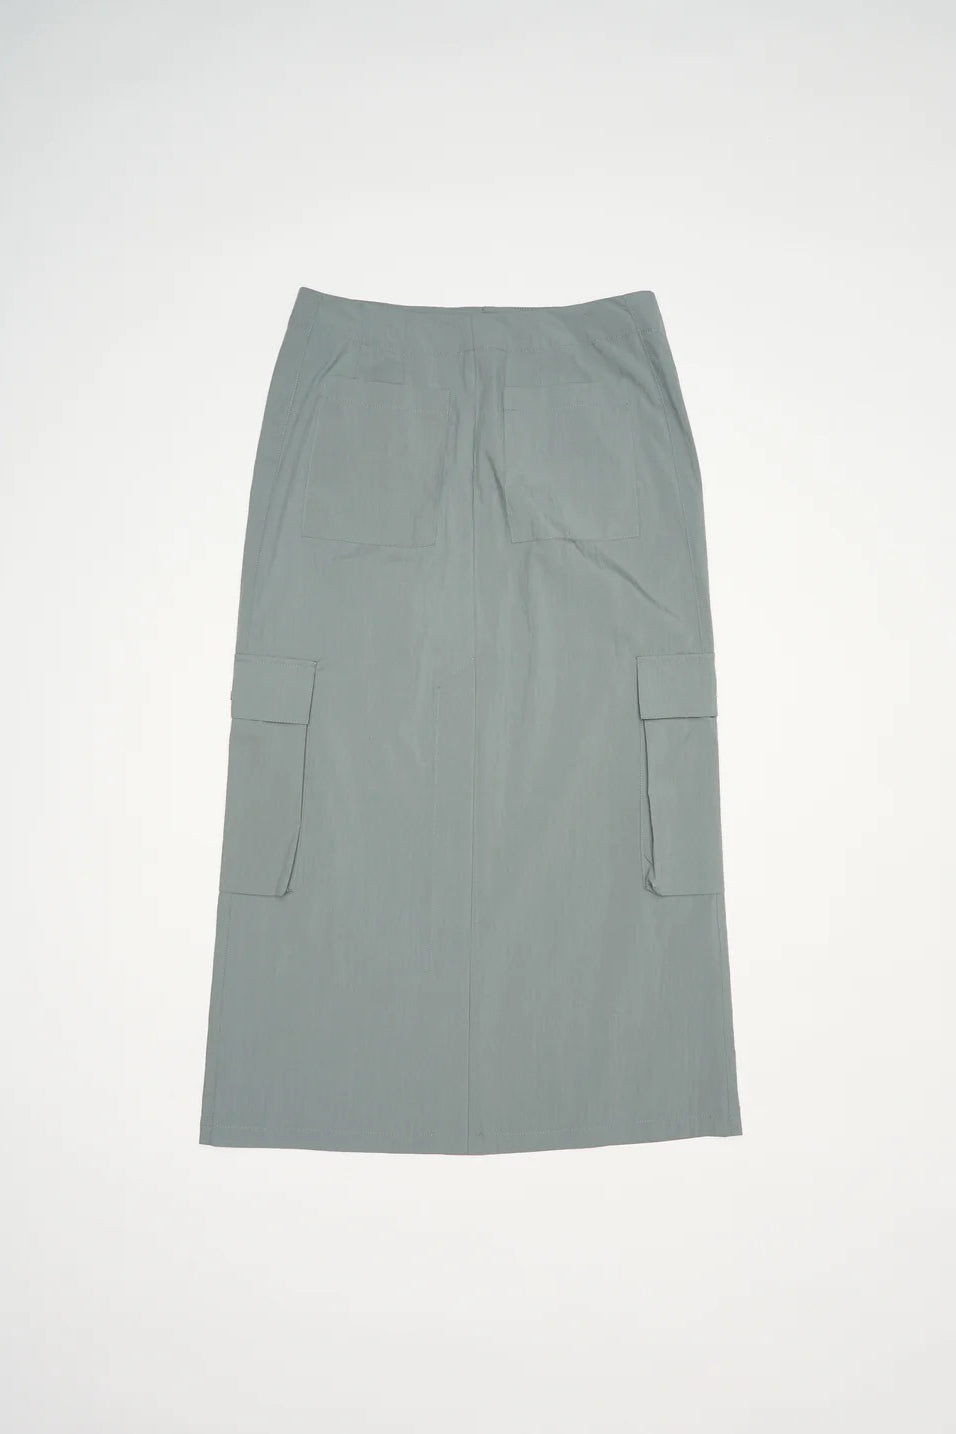 PV Identity Cargo Skirt // Washed Teal